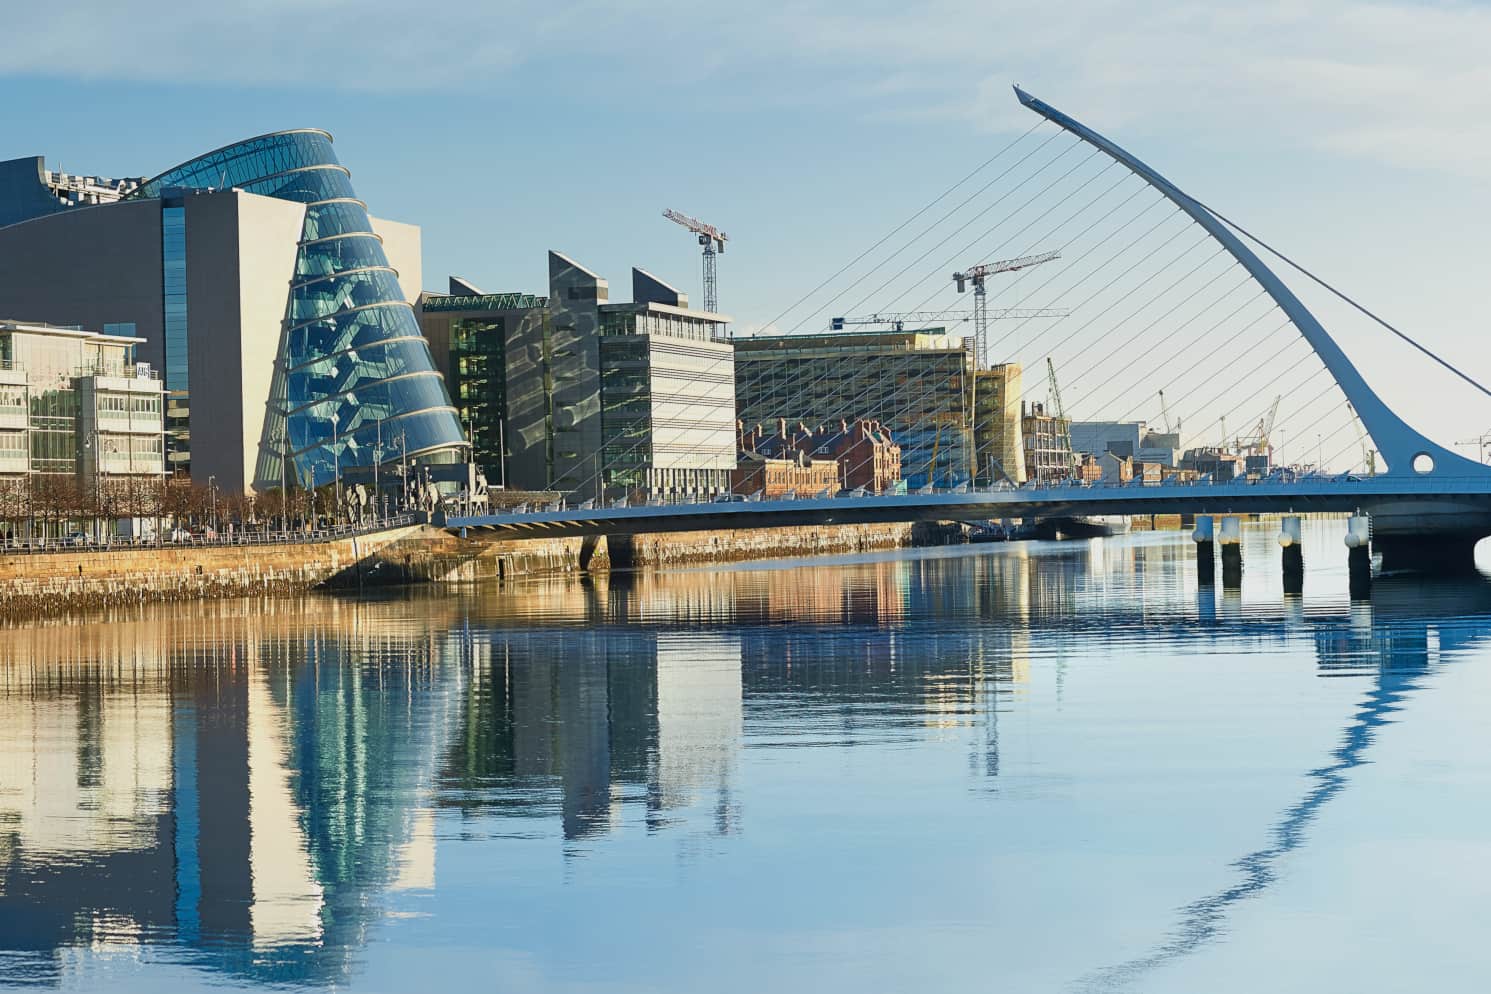 Office buildings along the north shore of the River Liffey with the iconic Samuel Beckett Bridge in the foreground